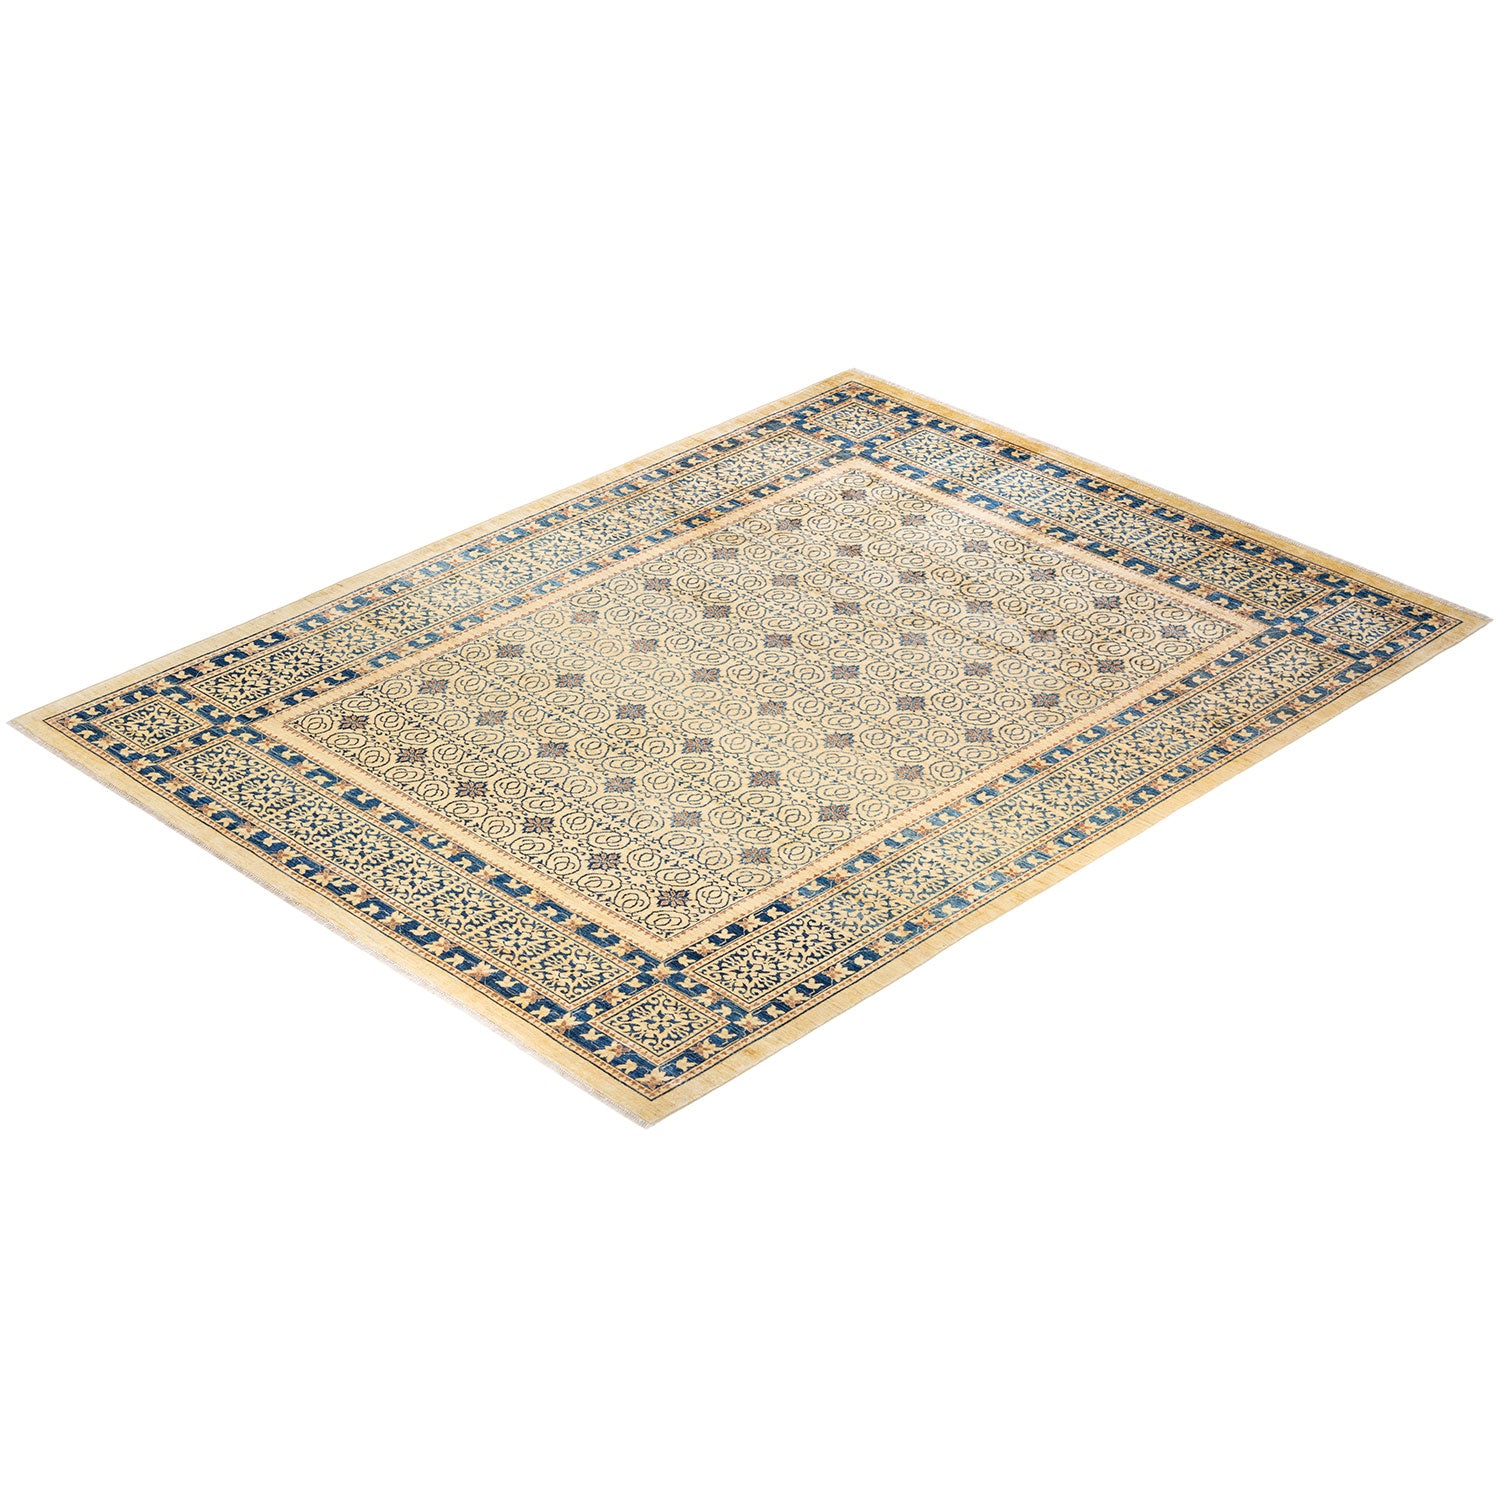 Ornate area rug with intricate design in beige, blue, and cream.